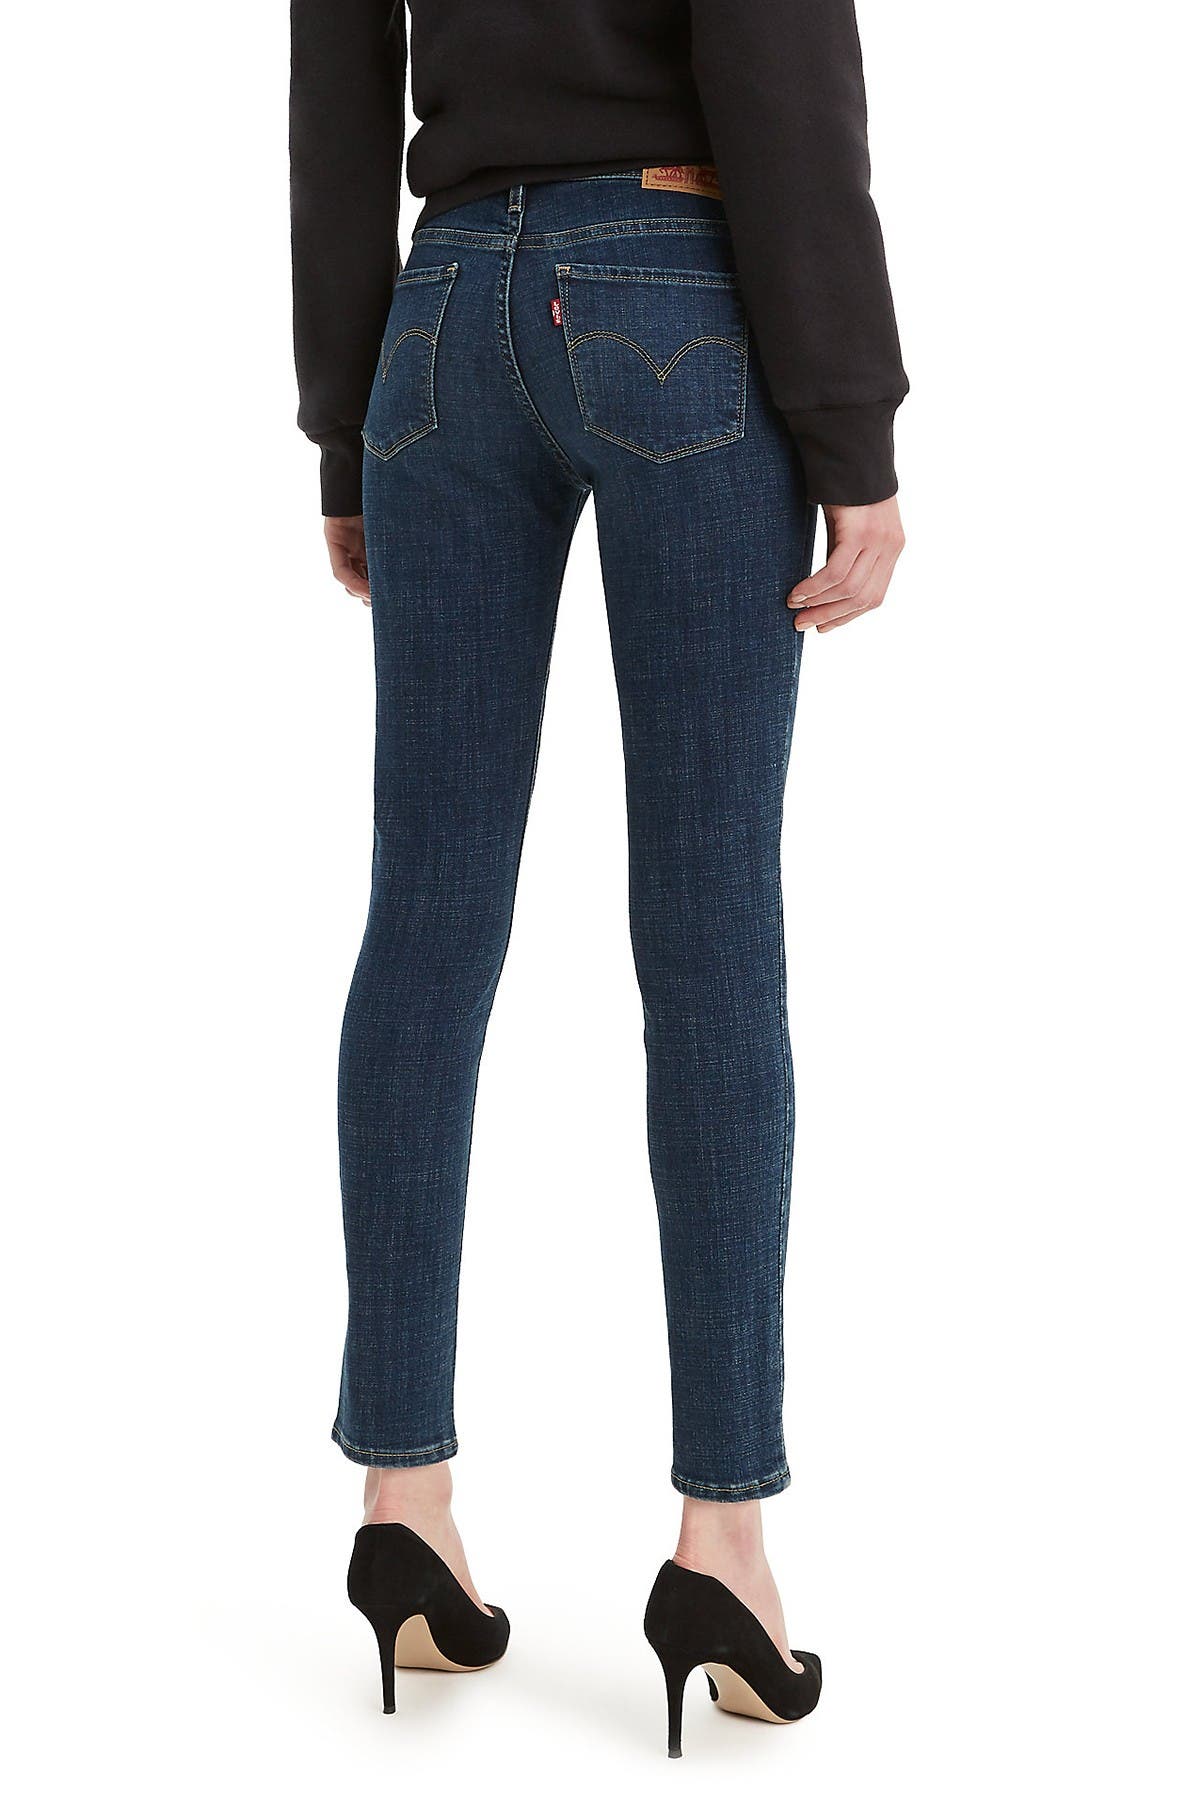 levi's 711 skinny ankle jeans